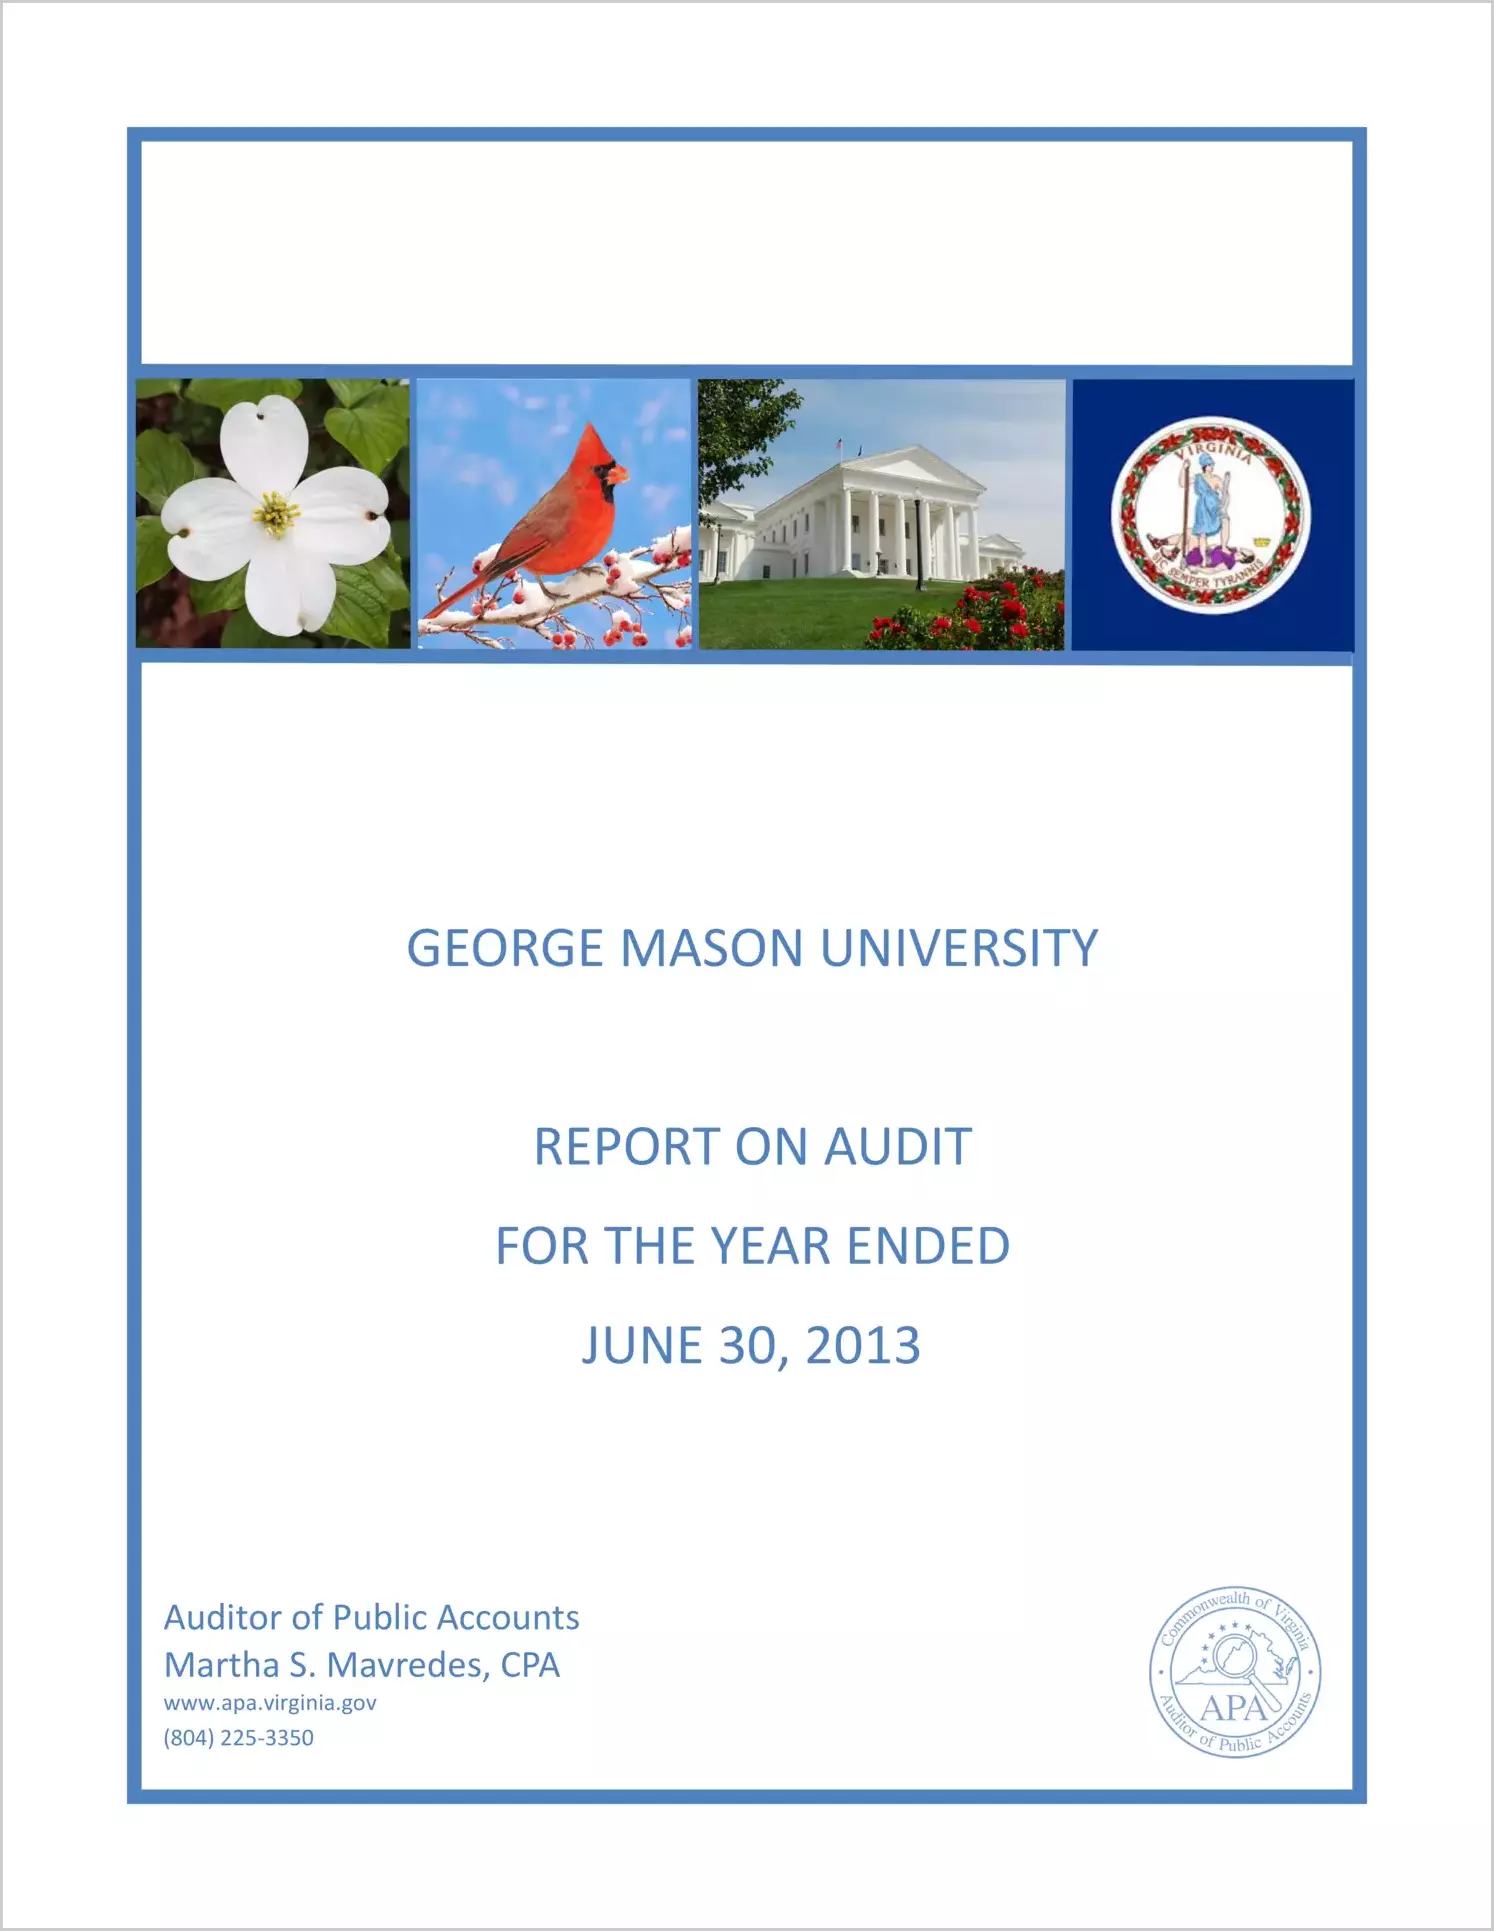 George Mason University for the year ended June 30, 2013